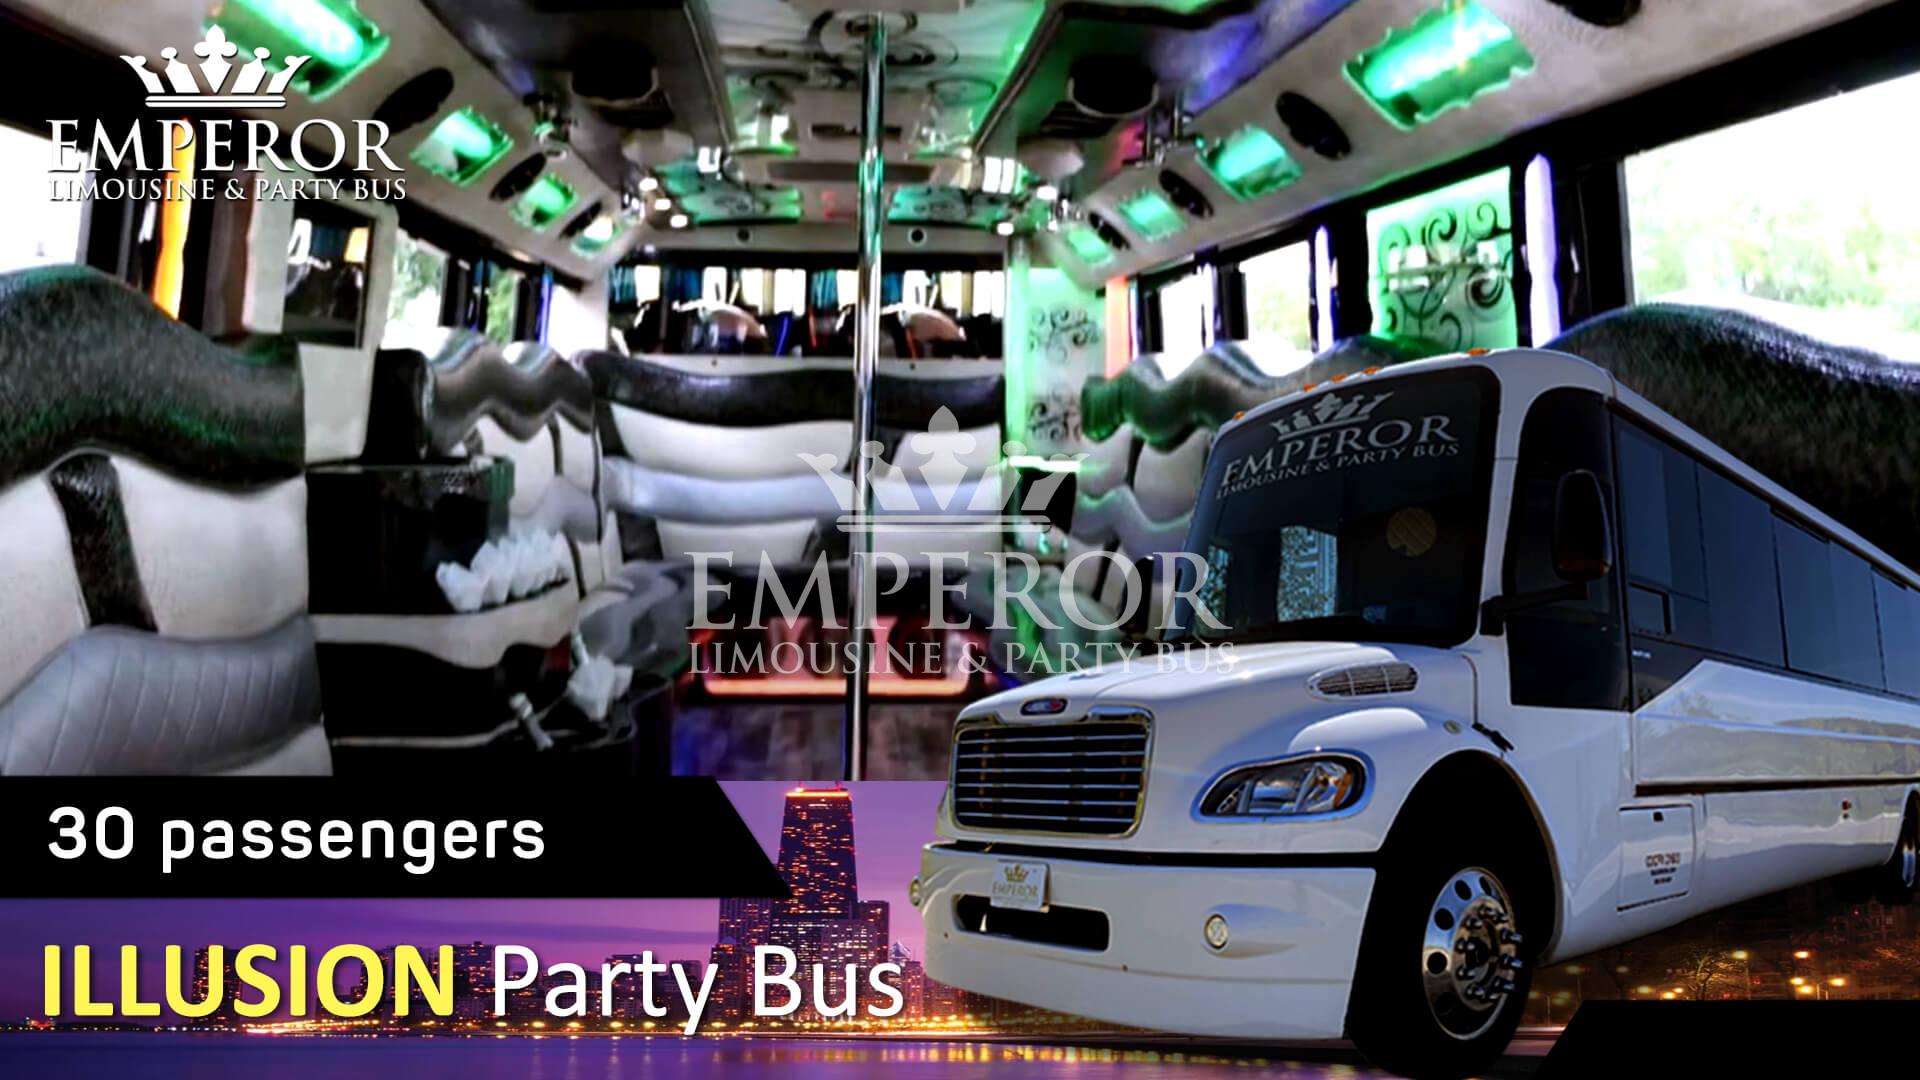 Illusion - party bus rentals for concerts